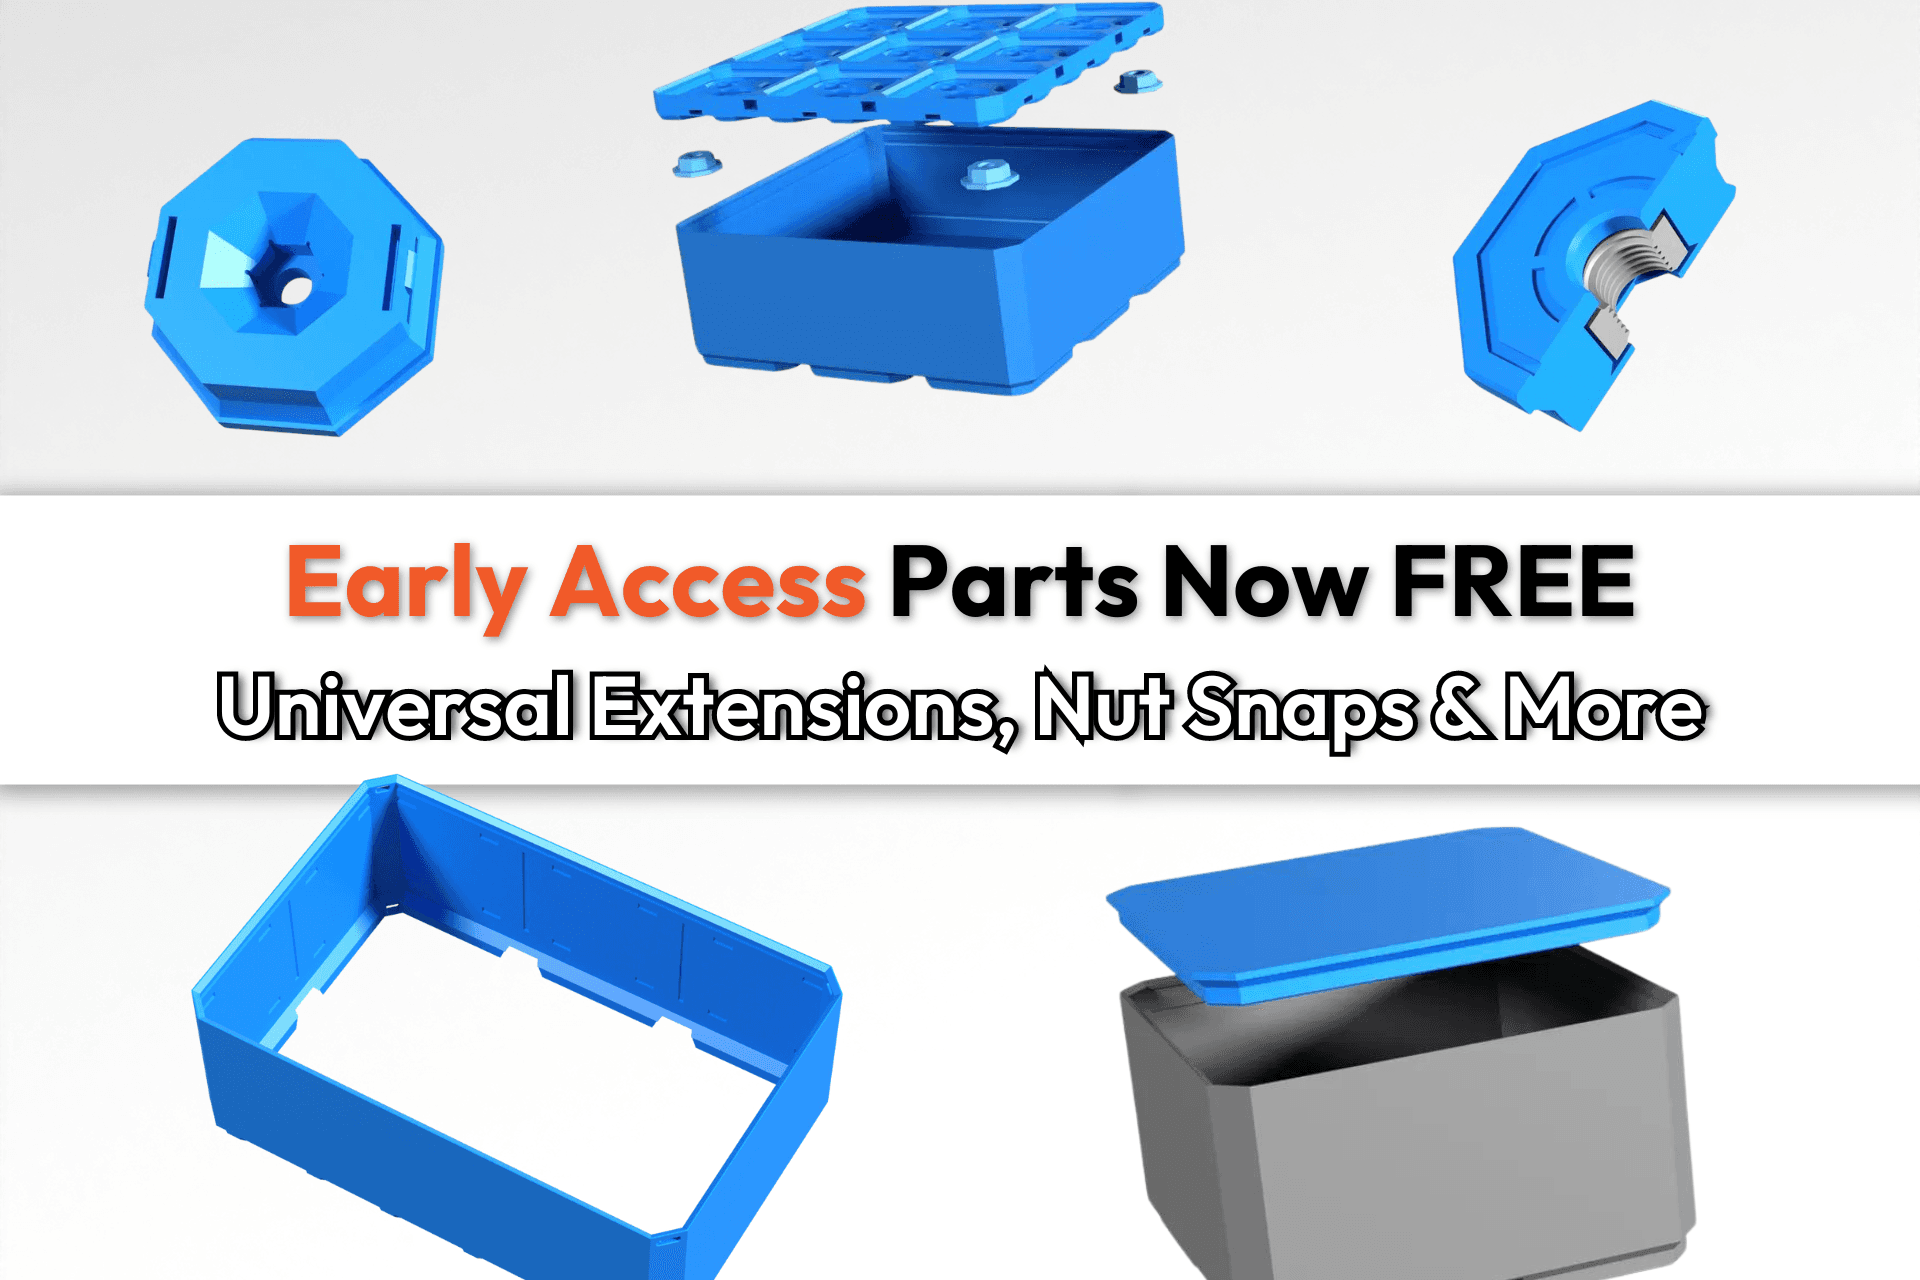 March ‘Early Access’ Multiboard Parts Now FREE